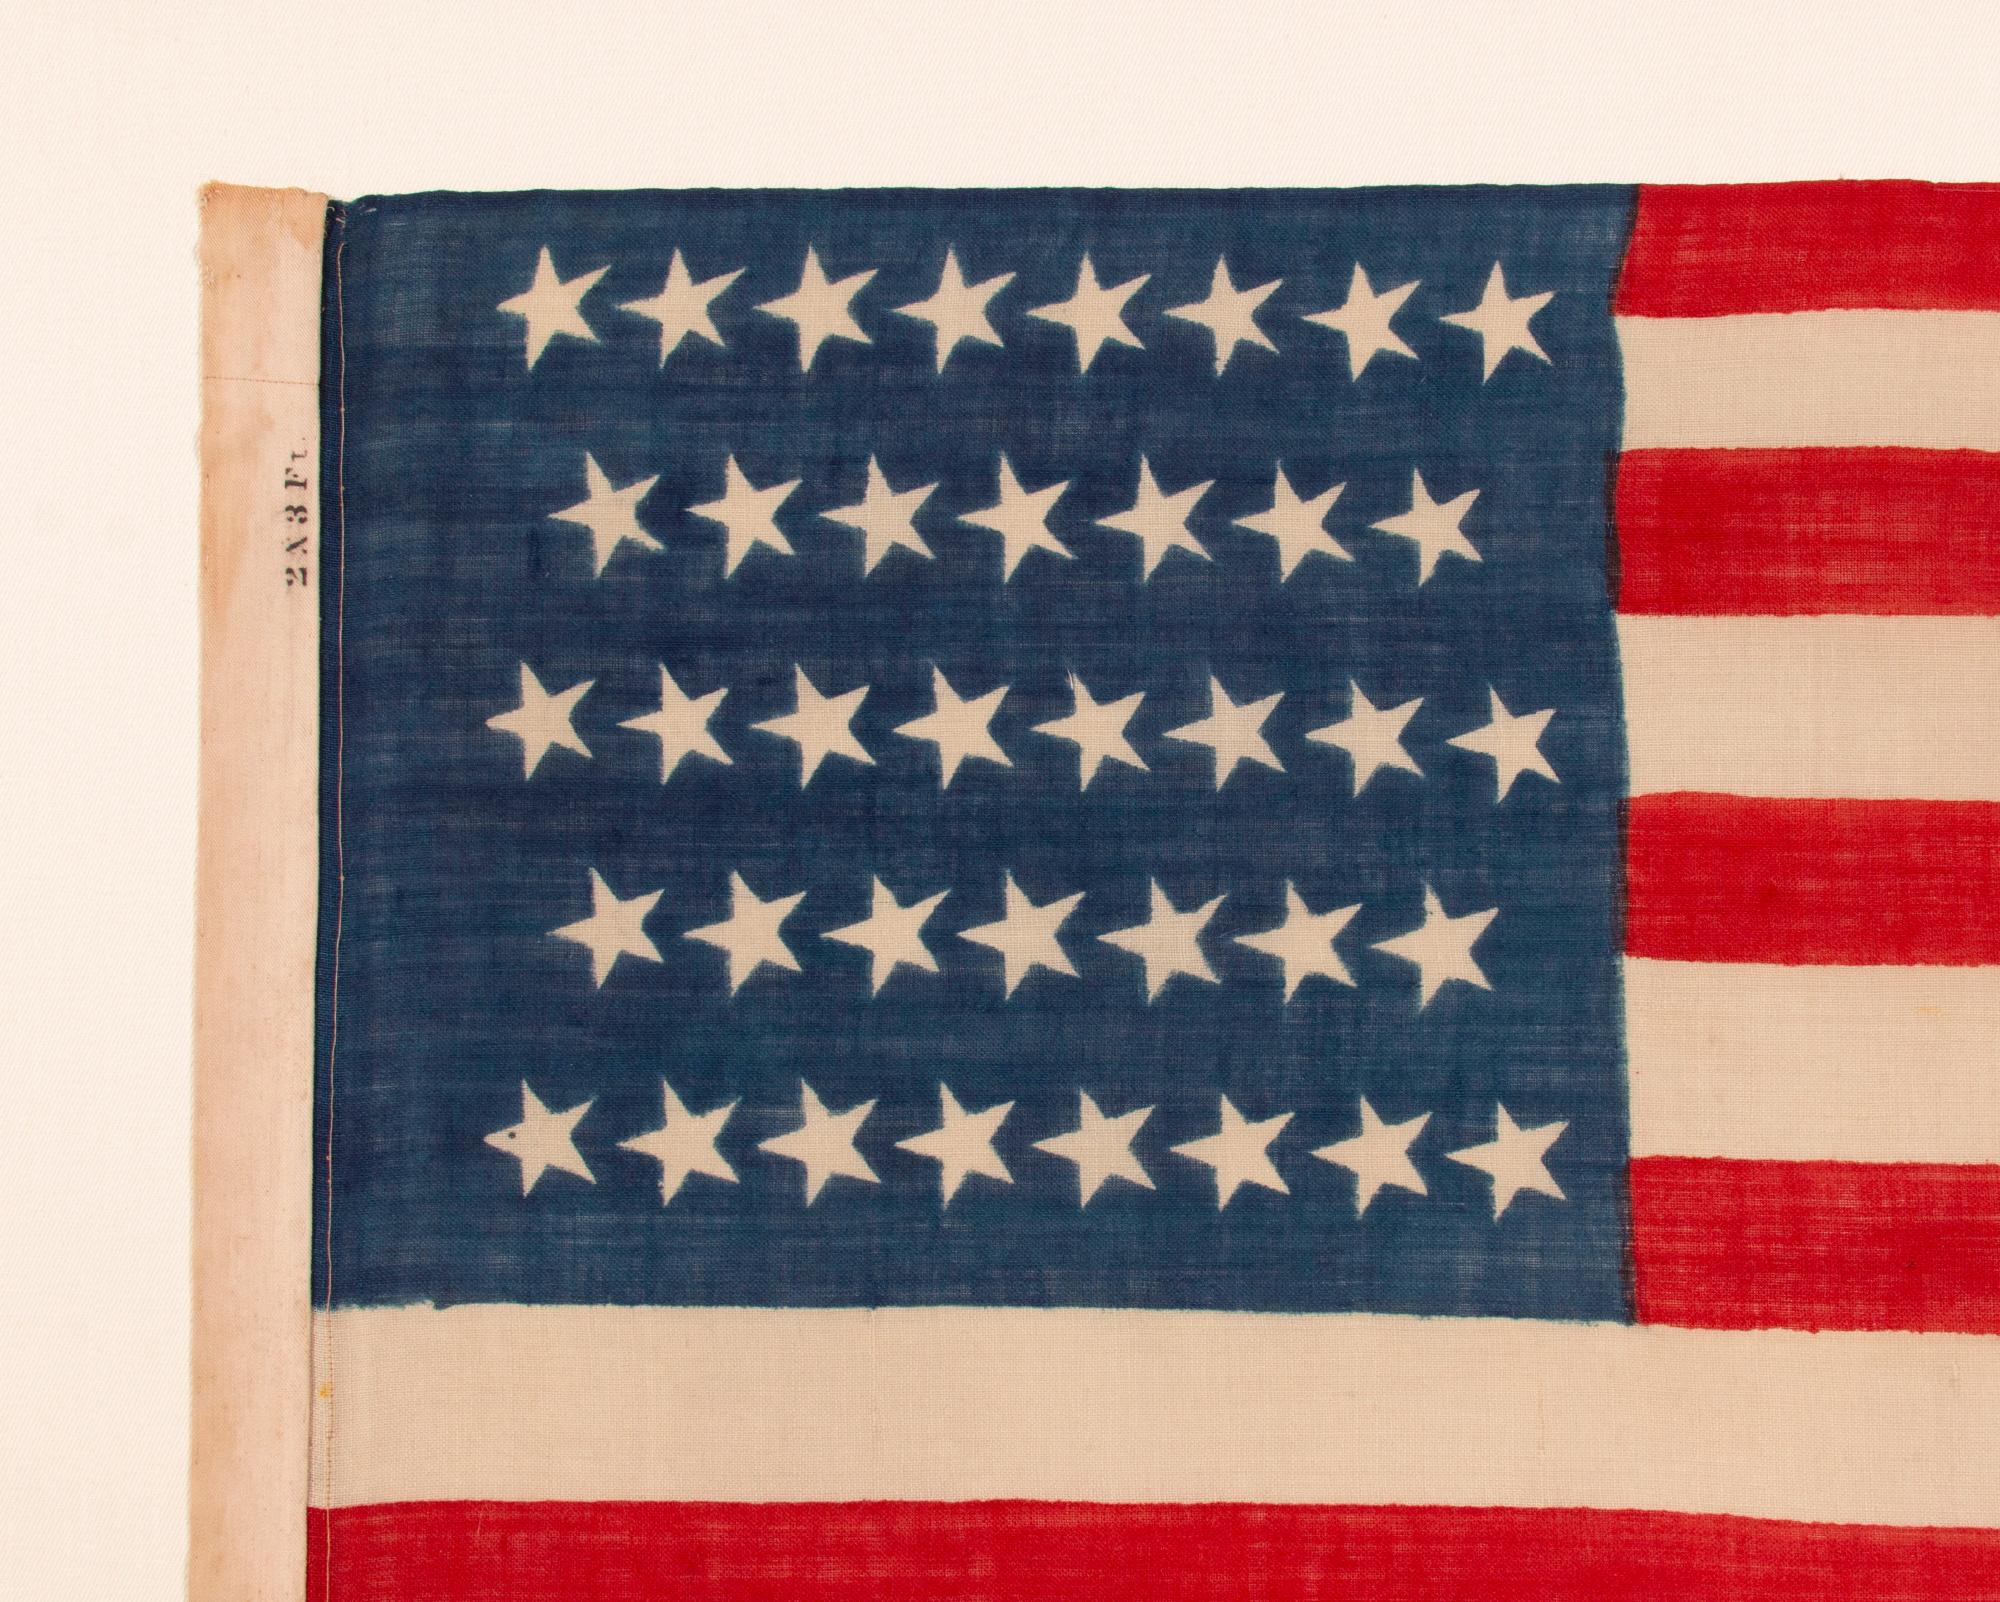 38 CANTED STARS IN STAGGERED ROWS, ON A CLAMP-DYED, WOOL, ANTIQUE AMERICAN FLAG MADE BY THE HORSTMANN BROTHERS IN PHILADELPHIA, ALMOST CERTAINLY FOR DISPLAY AT THE 1876 CENTENNIAL EXPOSITION; A VERY RARE EXAMPLE WITH STRONG COLORS AND GREAT TEXTURE;